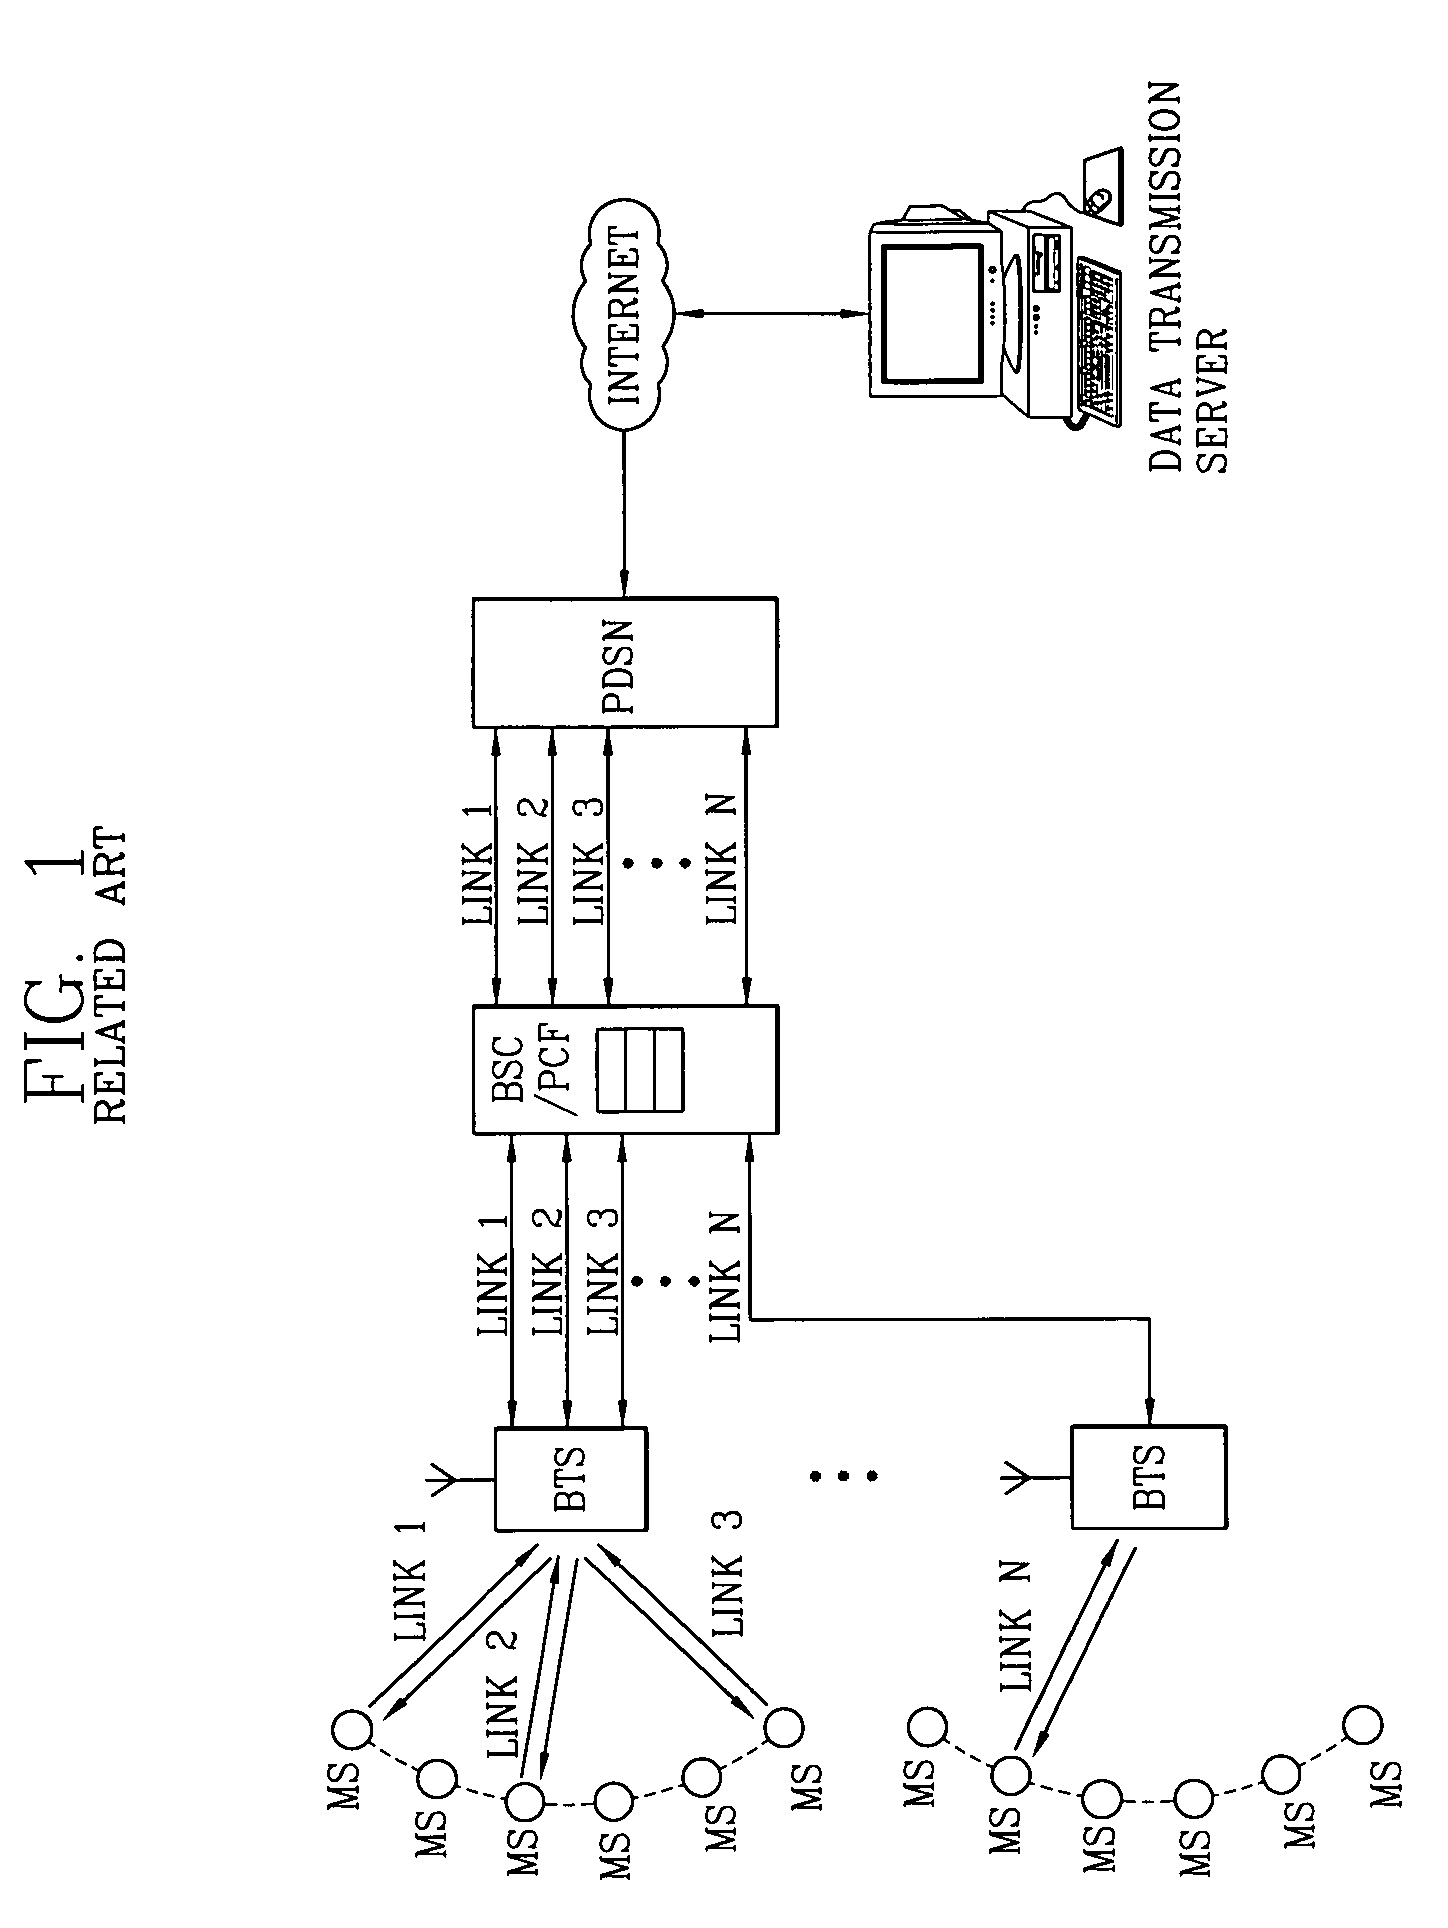 Multicast and broadcast transmission method and apparatus of a CDMA mobile communication network